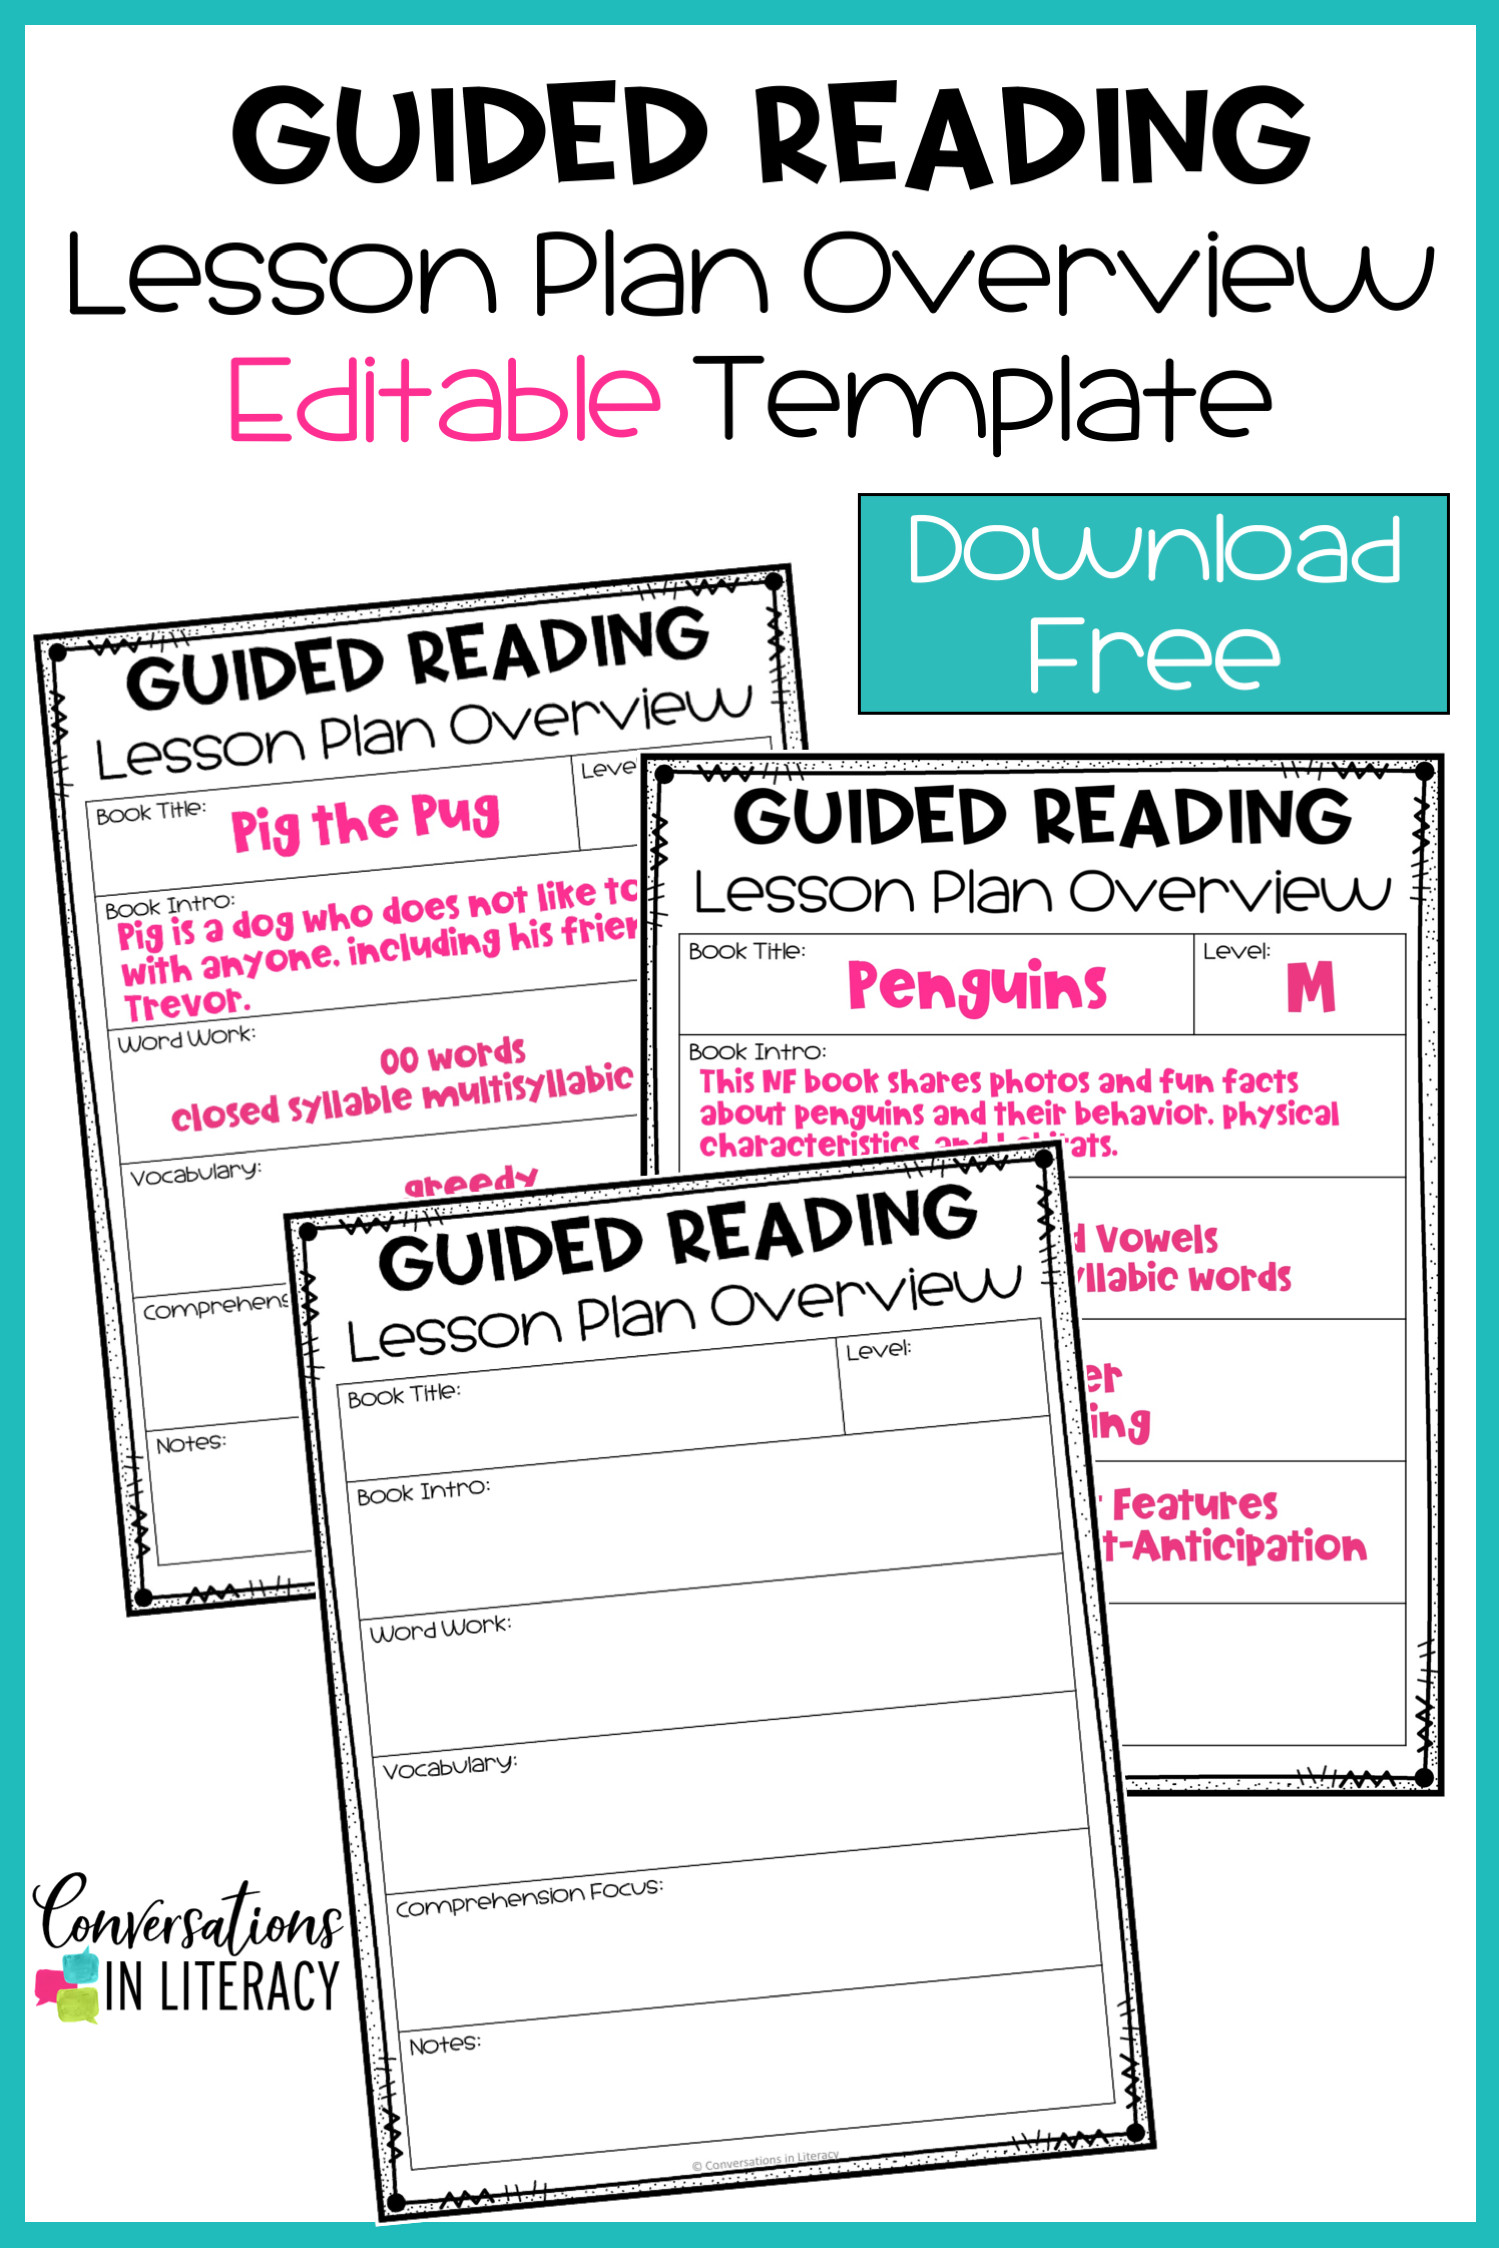 Guided Reading Lesson Plan Template Free Editable Guided Reading Lesson Plan Overview